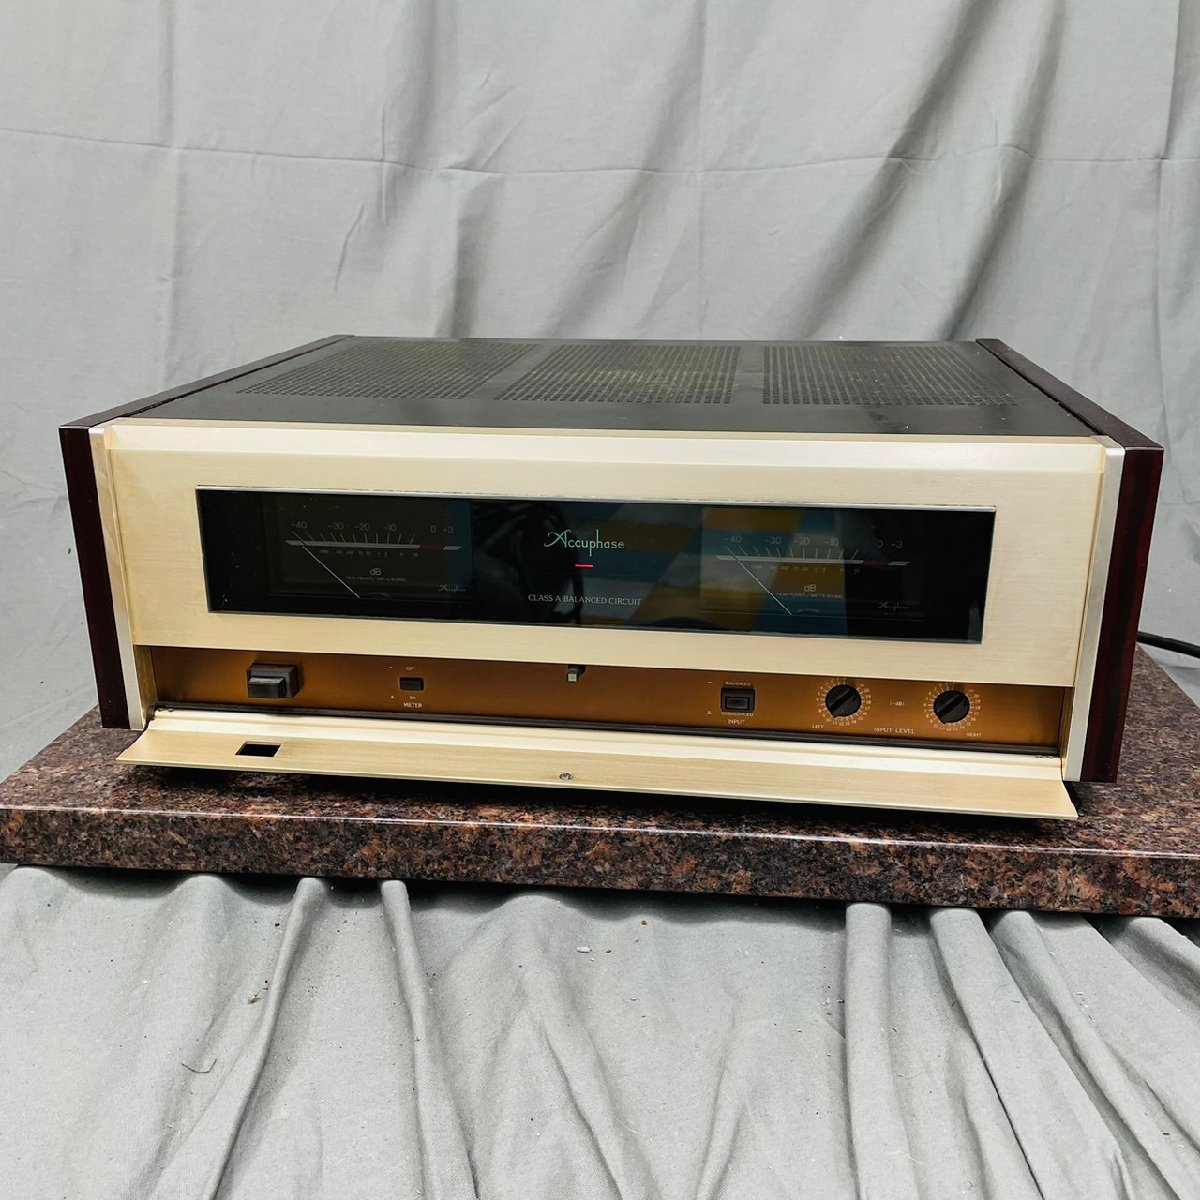 T4063＊【ジャンク】Accuphase アキュフェーズ P-102 ステレオパワーアンプ_画像3